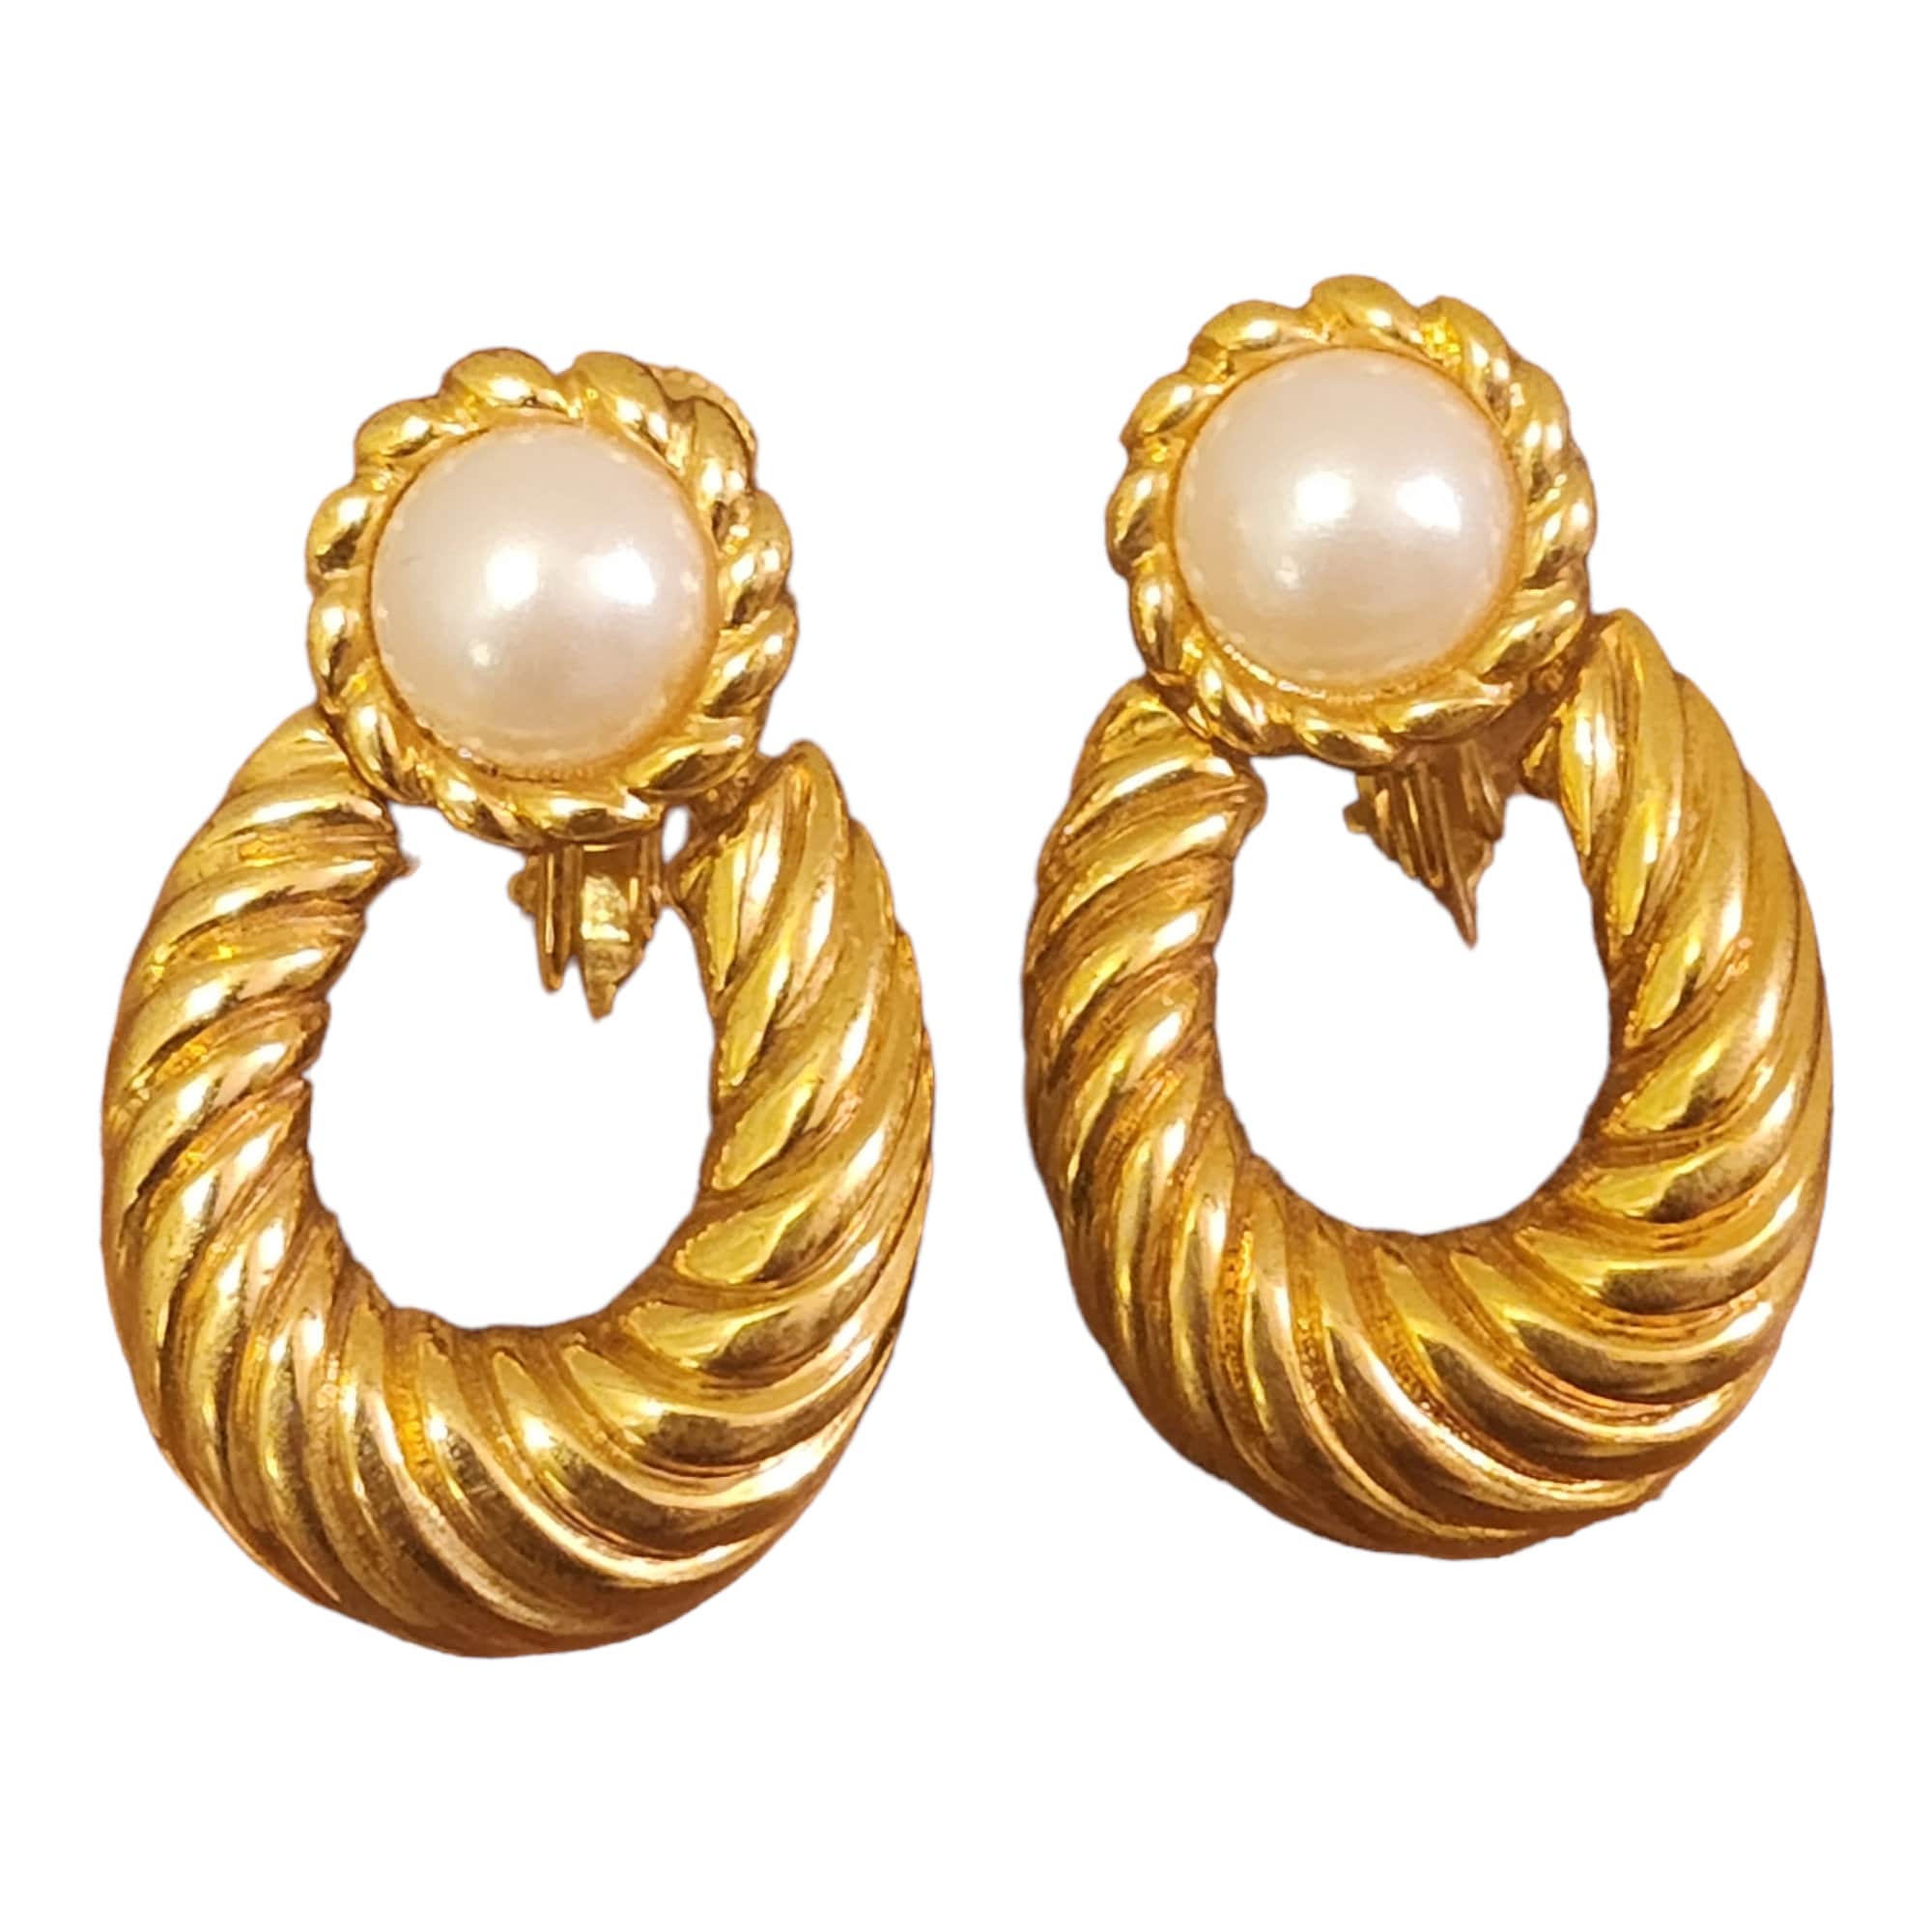 Stunning NAPIER Scalloped Gold-Plated Articulated Doorknocker Screw Back Vintage Earrings